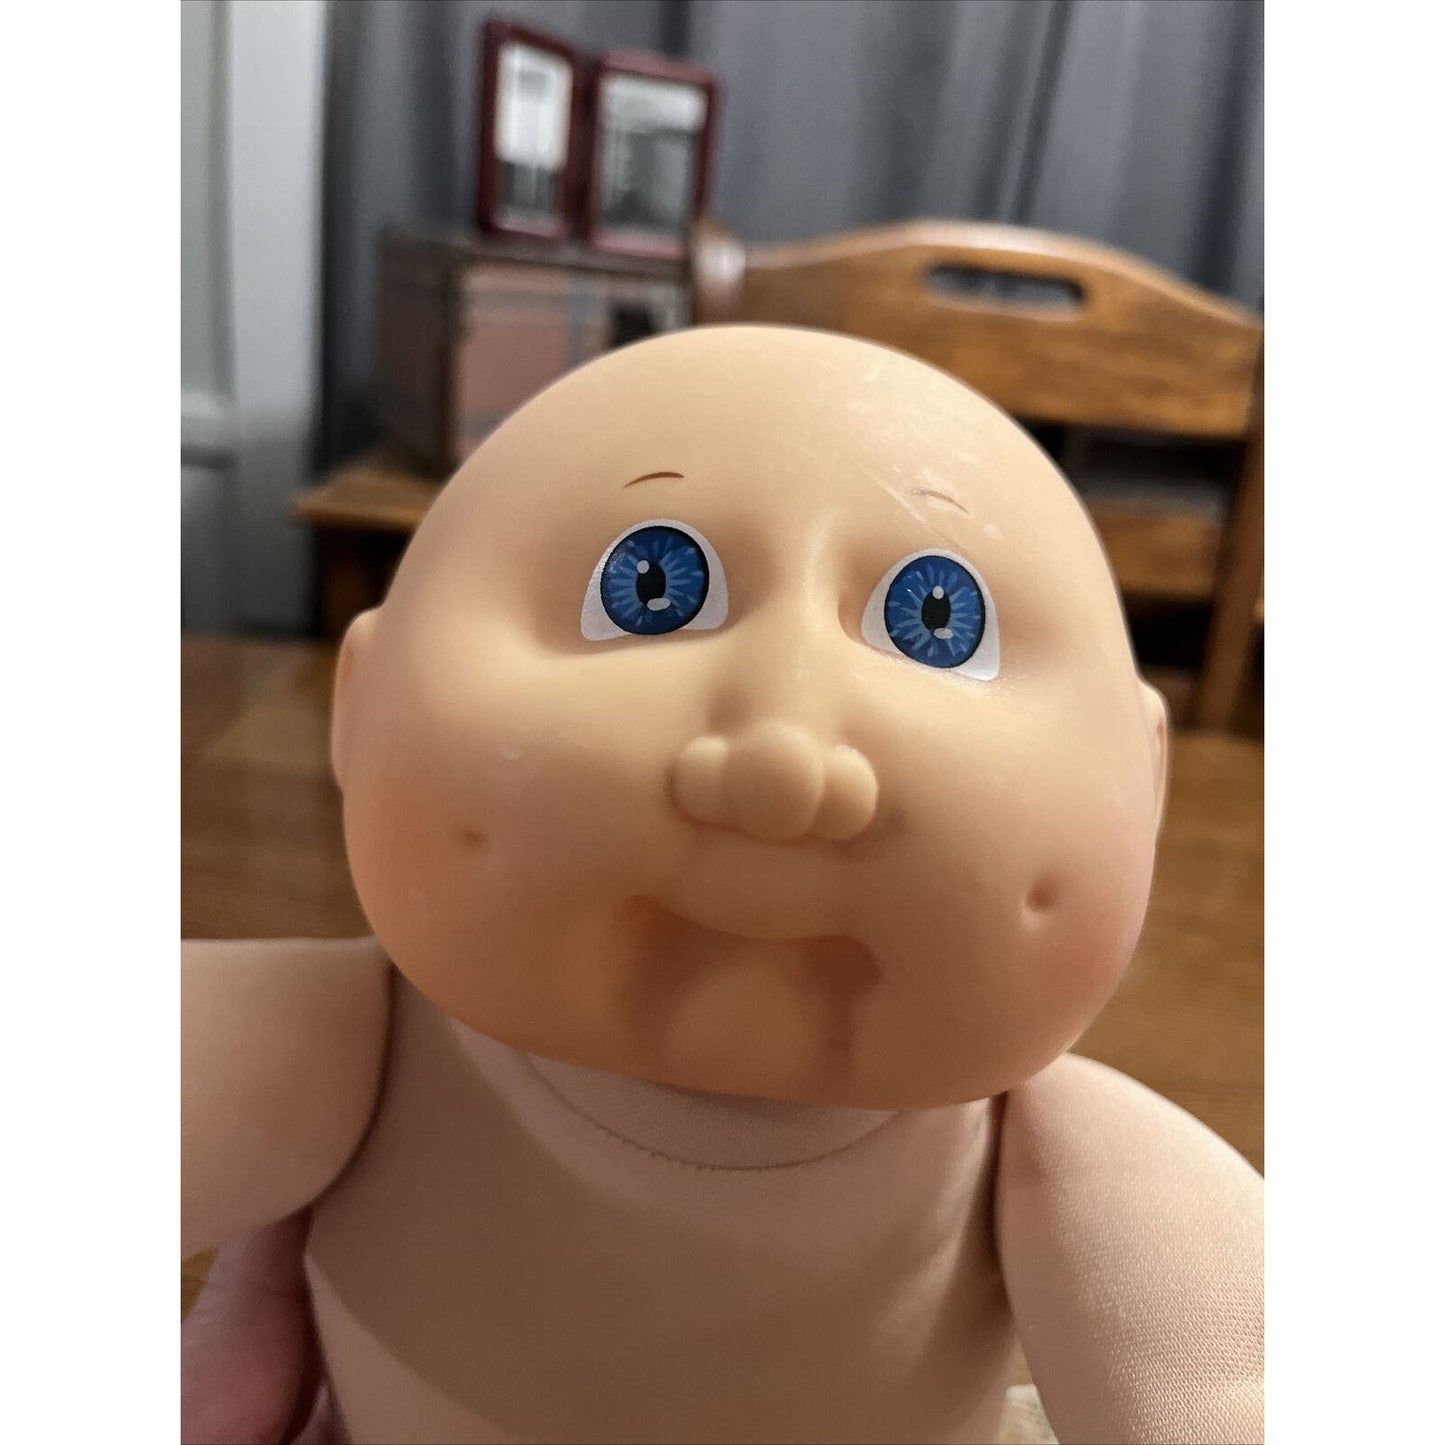 1980s Cabbage Patch Kid Bald Blue Eyes Blush Cheeks Dimples Bumble Bee Shirt